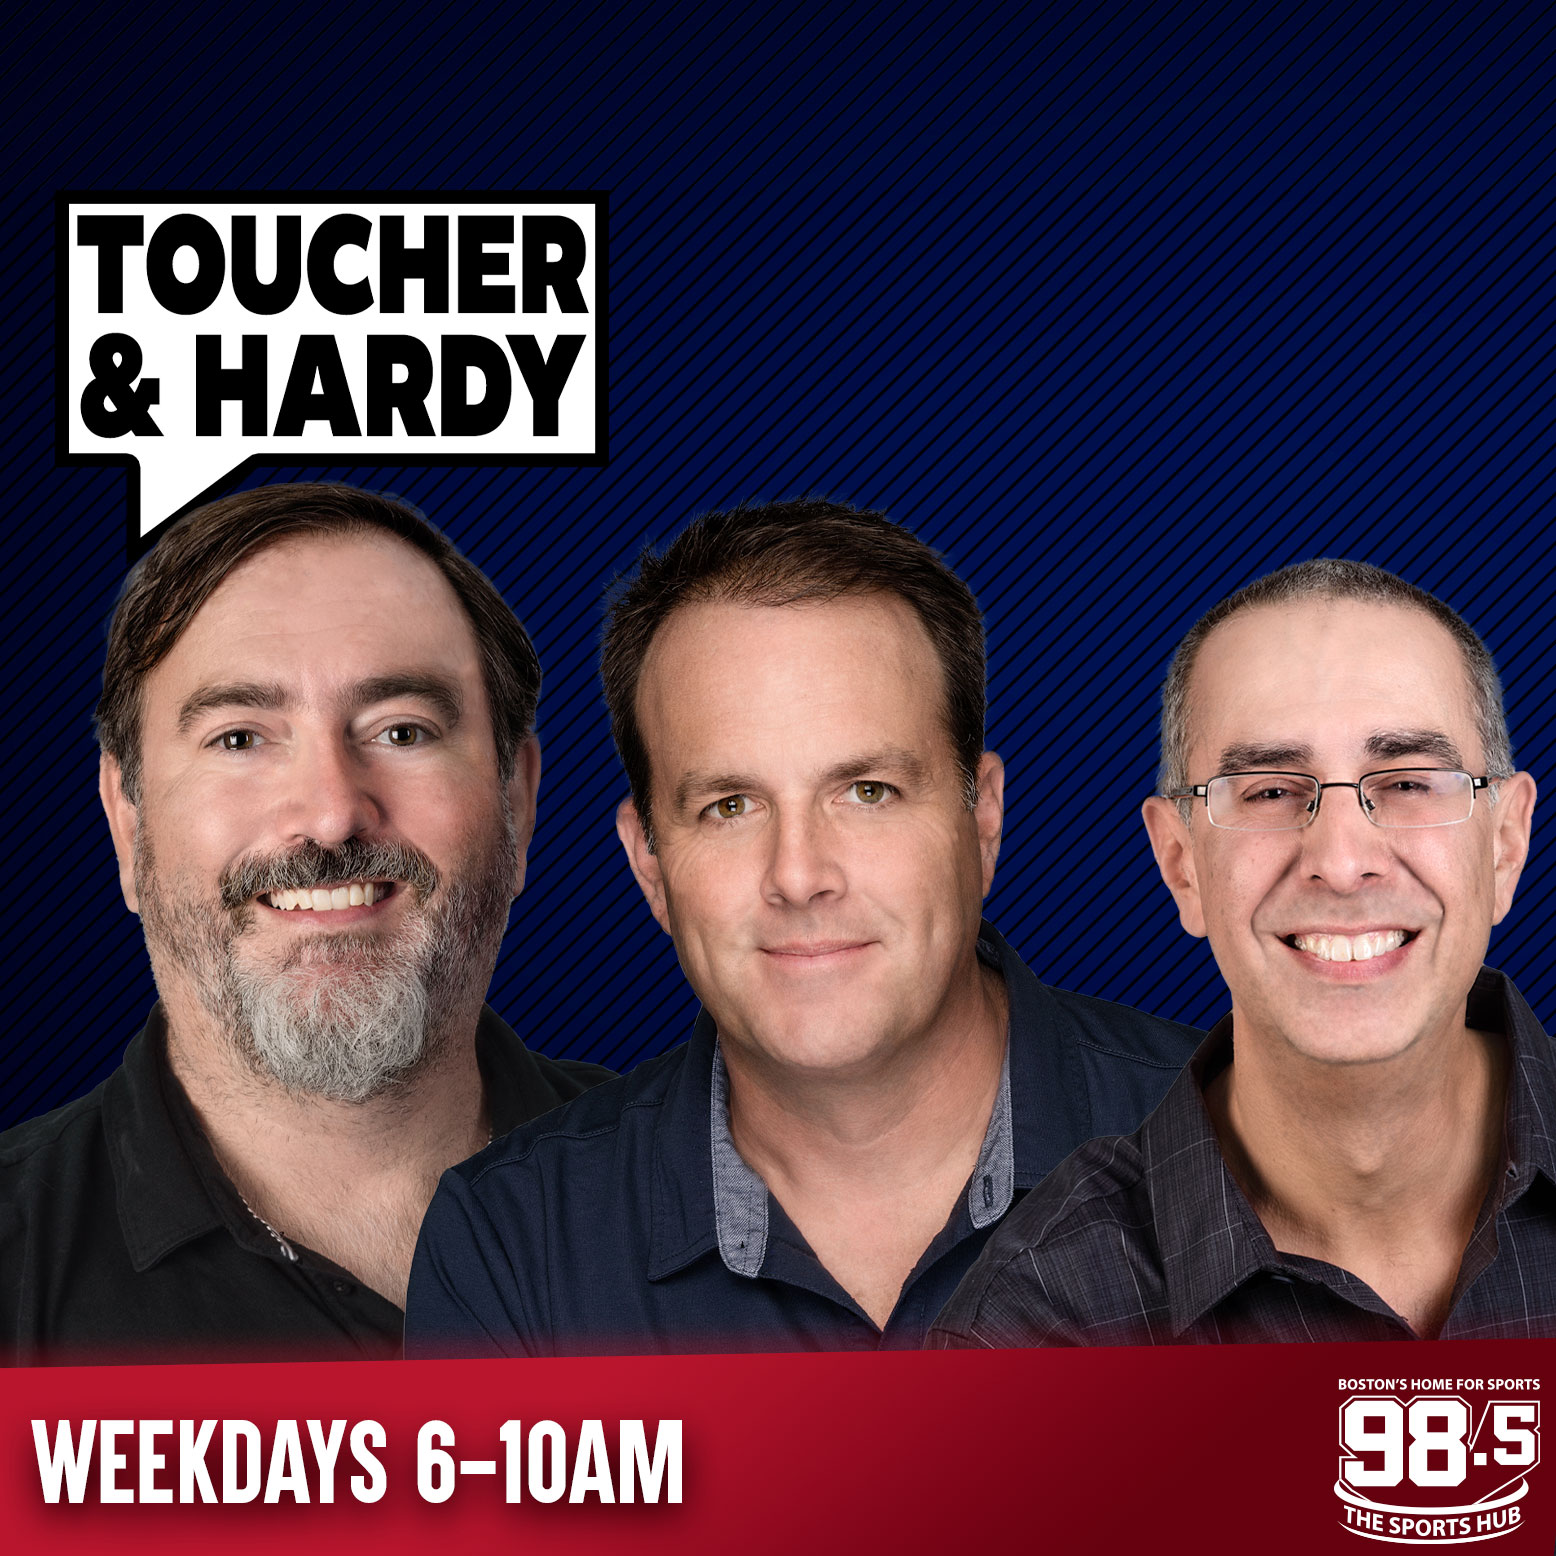 Good start for Patriots in free agency | Do Patriots need Calvin Ridley, Justin Fields? - 3/12 (Hour 2)